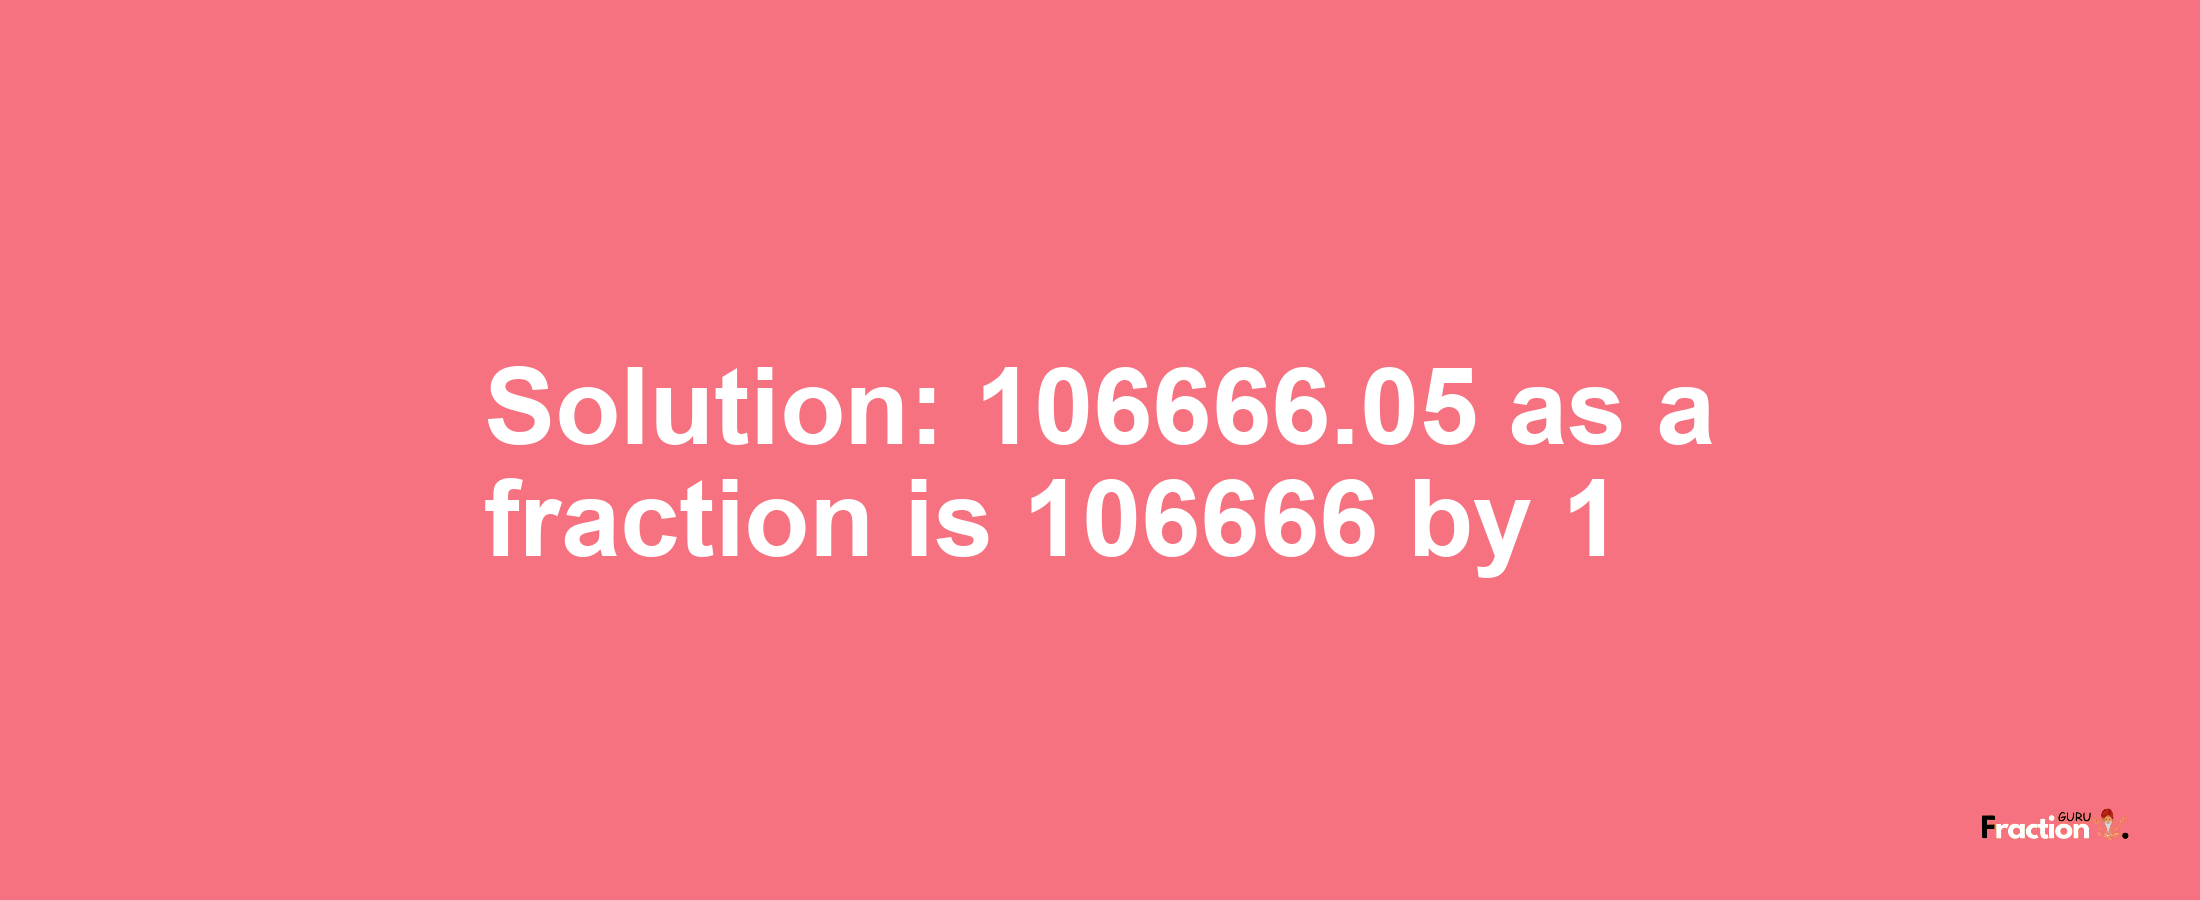 Solution:106666.05 as a fraction is 106666/1